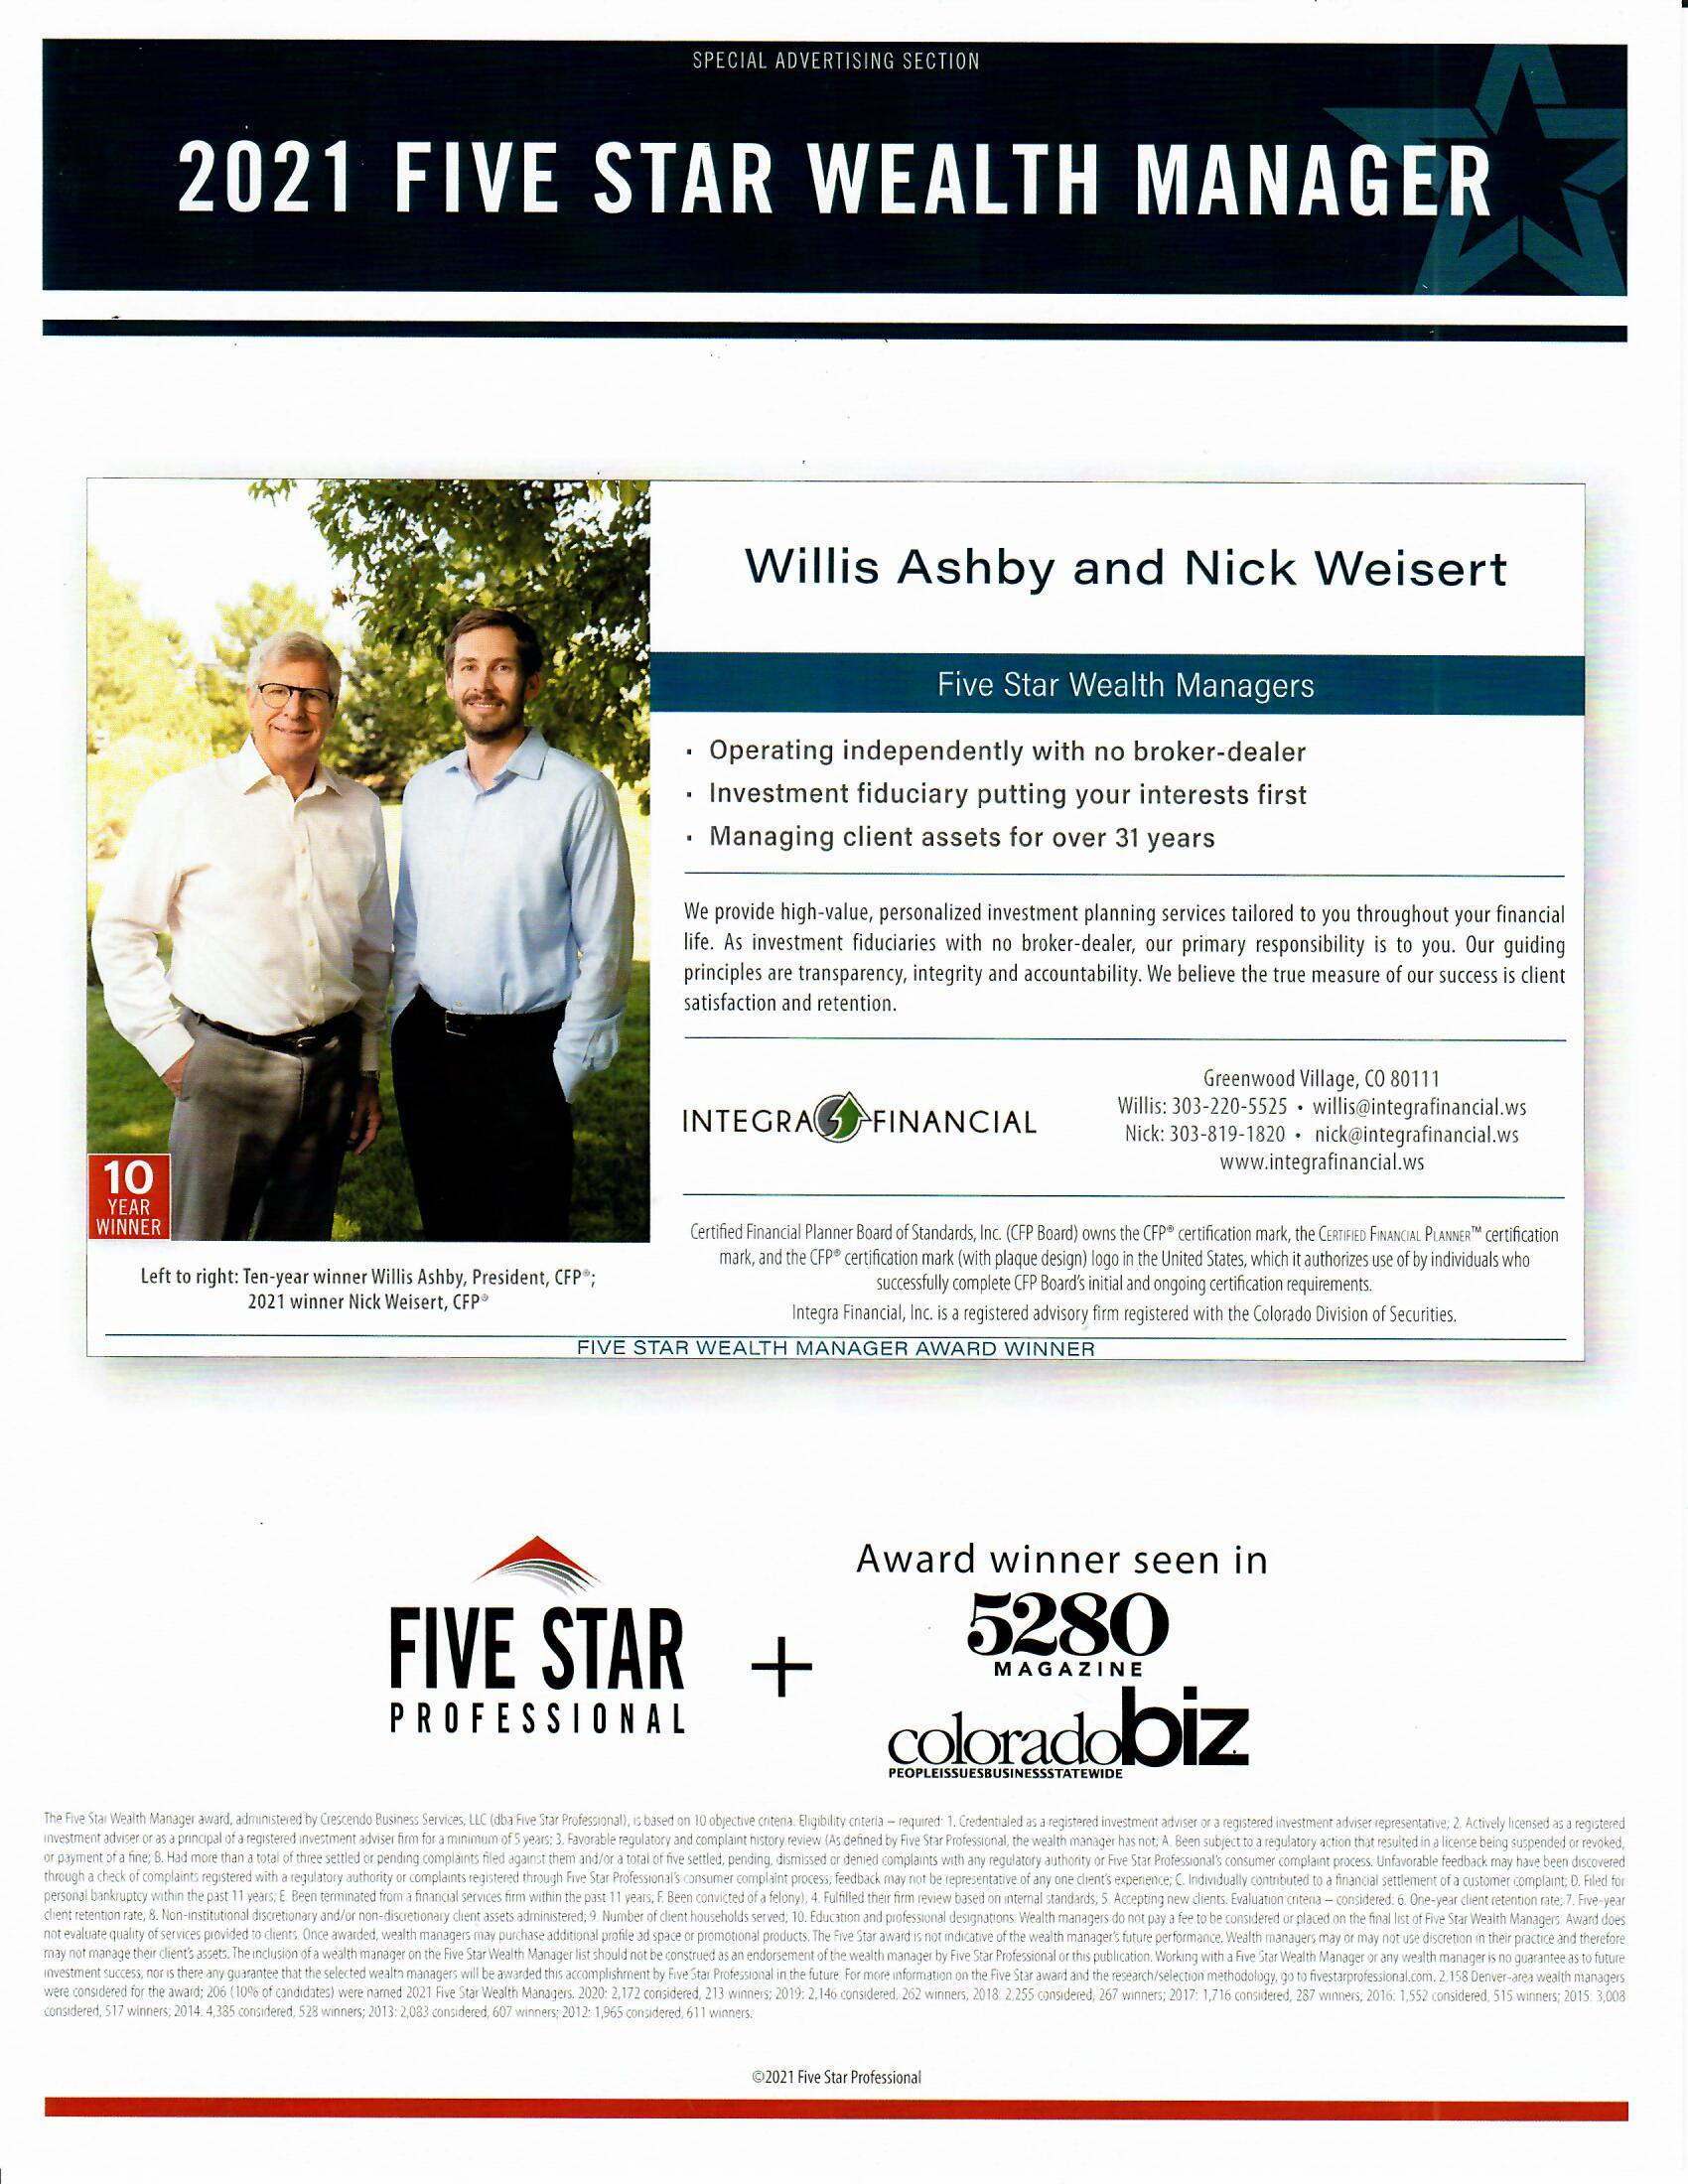 2021 Five Star Wealth Manager — Greenwood Village, CO — Integra Financial Inc